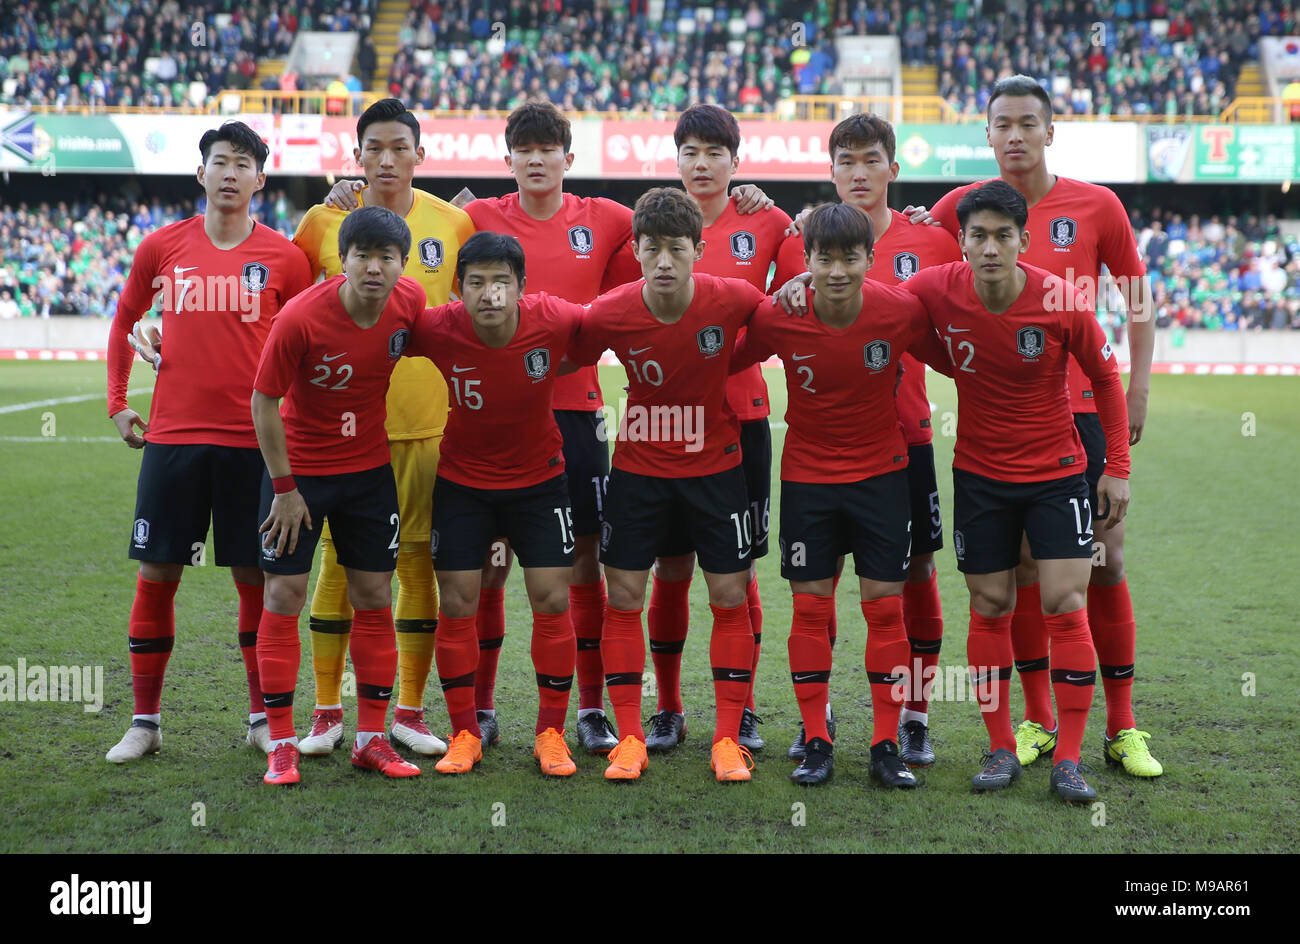 South Korea team group (top row, from left to right) Heung-Min Son, goalkeeper Seung-Gyu Kim, Min-Jae Kim, Sung-Yeung Ki, Hyun-Soo Jang, Shin-Wook Kim (bottom row, from left to right) Chang-Hoon Kwon, Joo-Ho Park, Jae-Sung Lee, Jin-Su Kim and Yong Lee during the international friendly match at Windsor Park, Belfast. PRESS ASSOCIATION Photo. Picture date: Saturday March 24, 2018. See PA story SOCCER N Ireland. Photo credit should read: Brian Lawless/PA Wire. RESTRICTIONS: Editorial use only, No commercial use without prior permission. Stock Photo